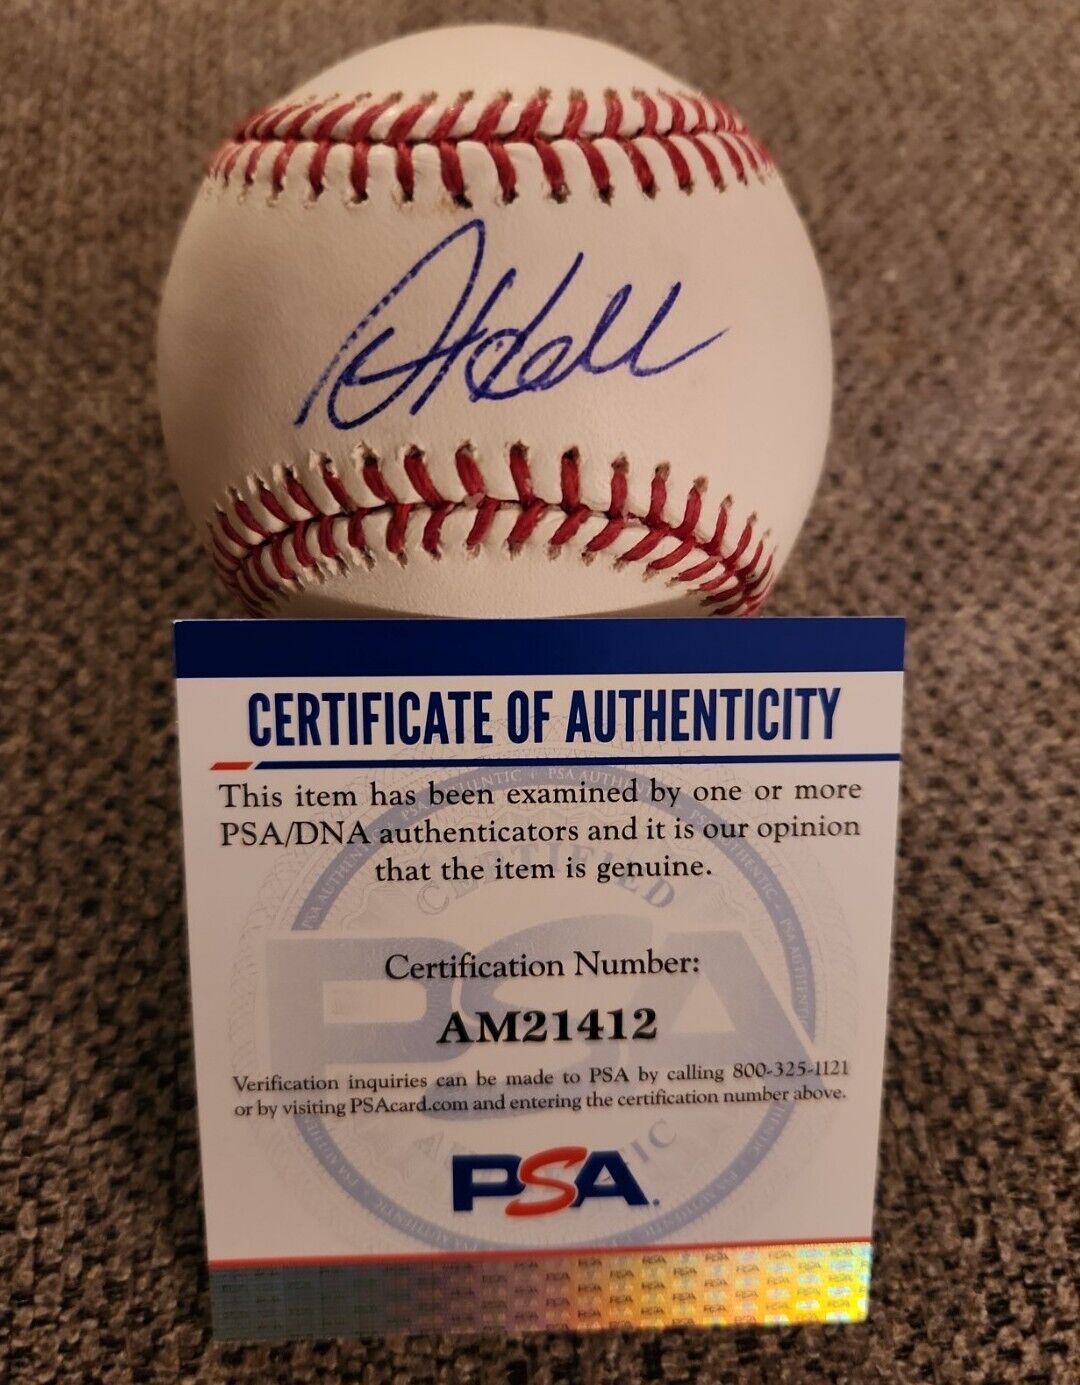 DL HALL SIGNED OMLB BASEBALL BALTIMORE ORIOLES PSA/DNA AUTHENTICATED #AM21412